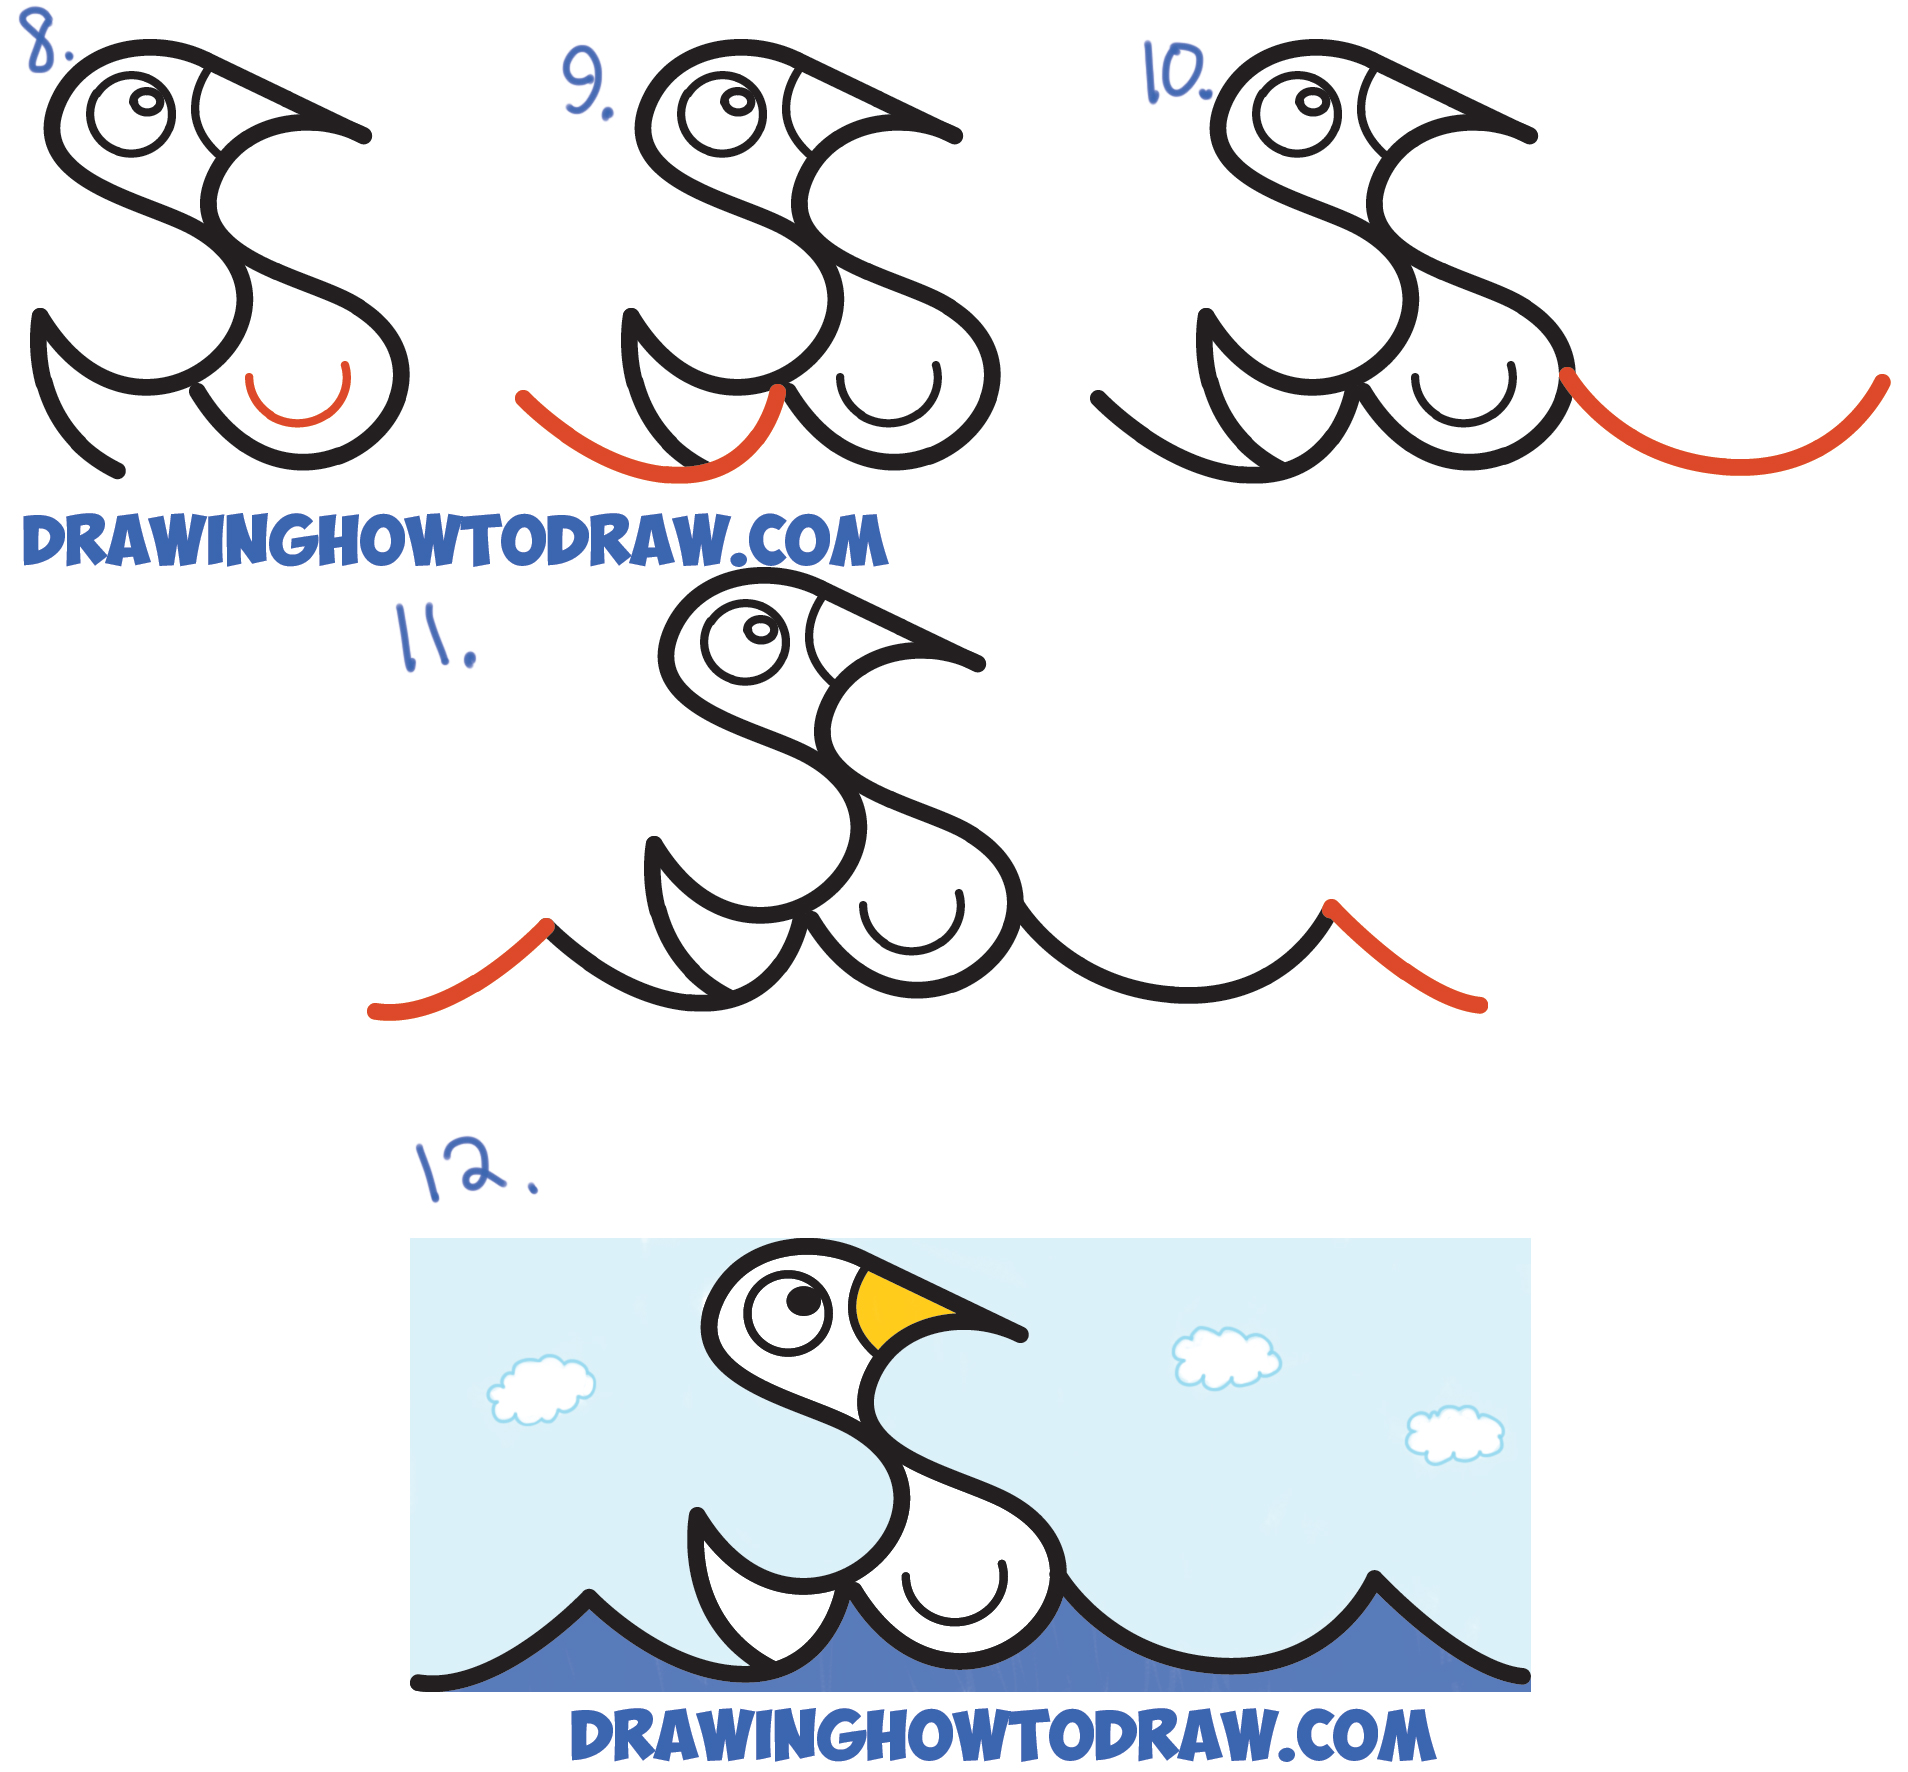 Learn How to Draw Cartoon Goose Floating on Water from Letter S Shapes Simple Steps Drawing Lesson for Children and Beginners